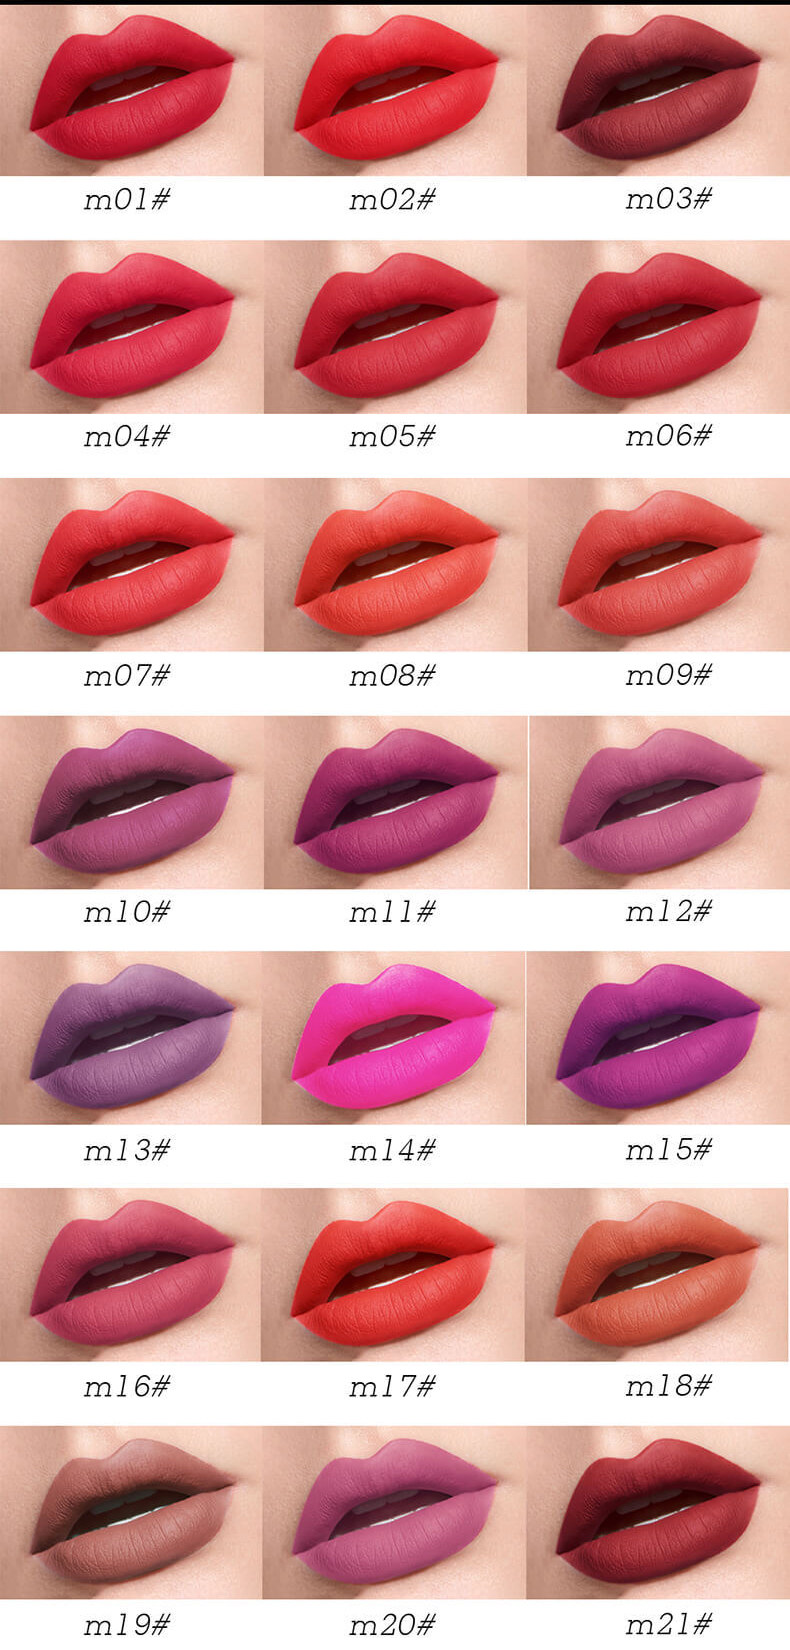 MATTE Private Label Waterproof Liquid Lipstick with 45 Colors - LG0416